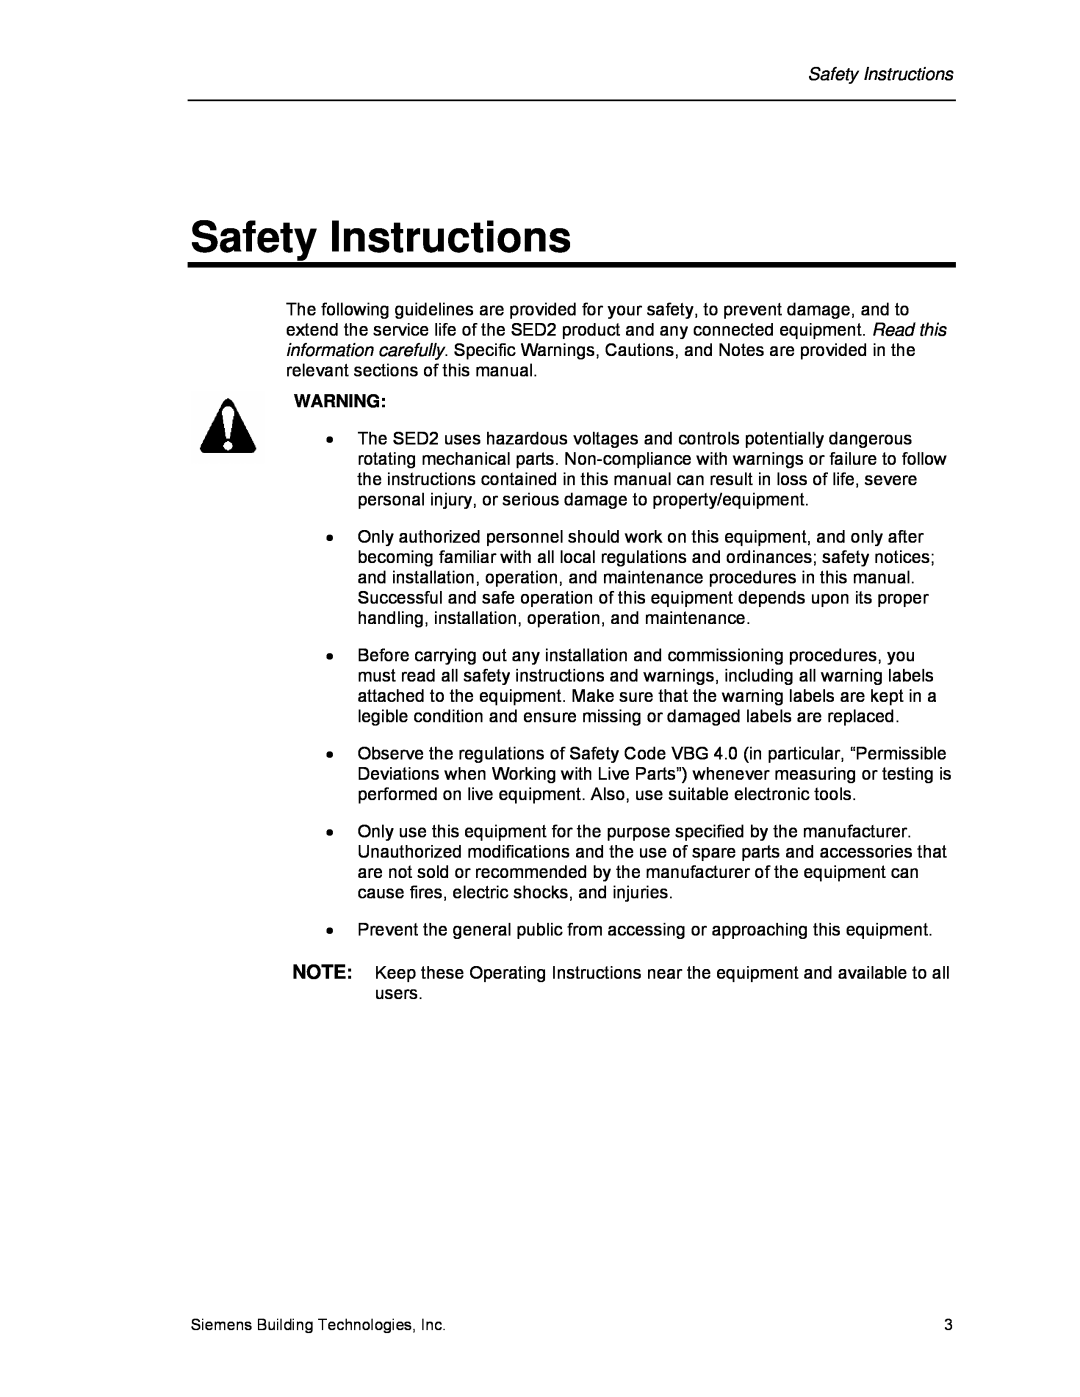 Siemens 125-3208 operating instructions Safety Instructions 